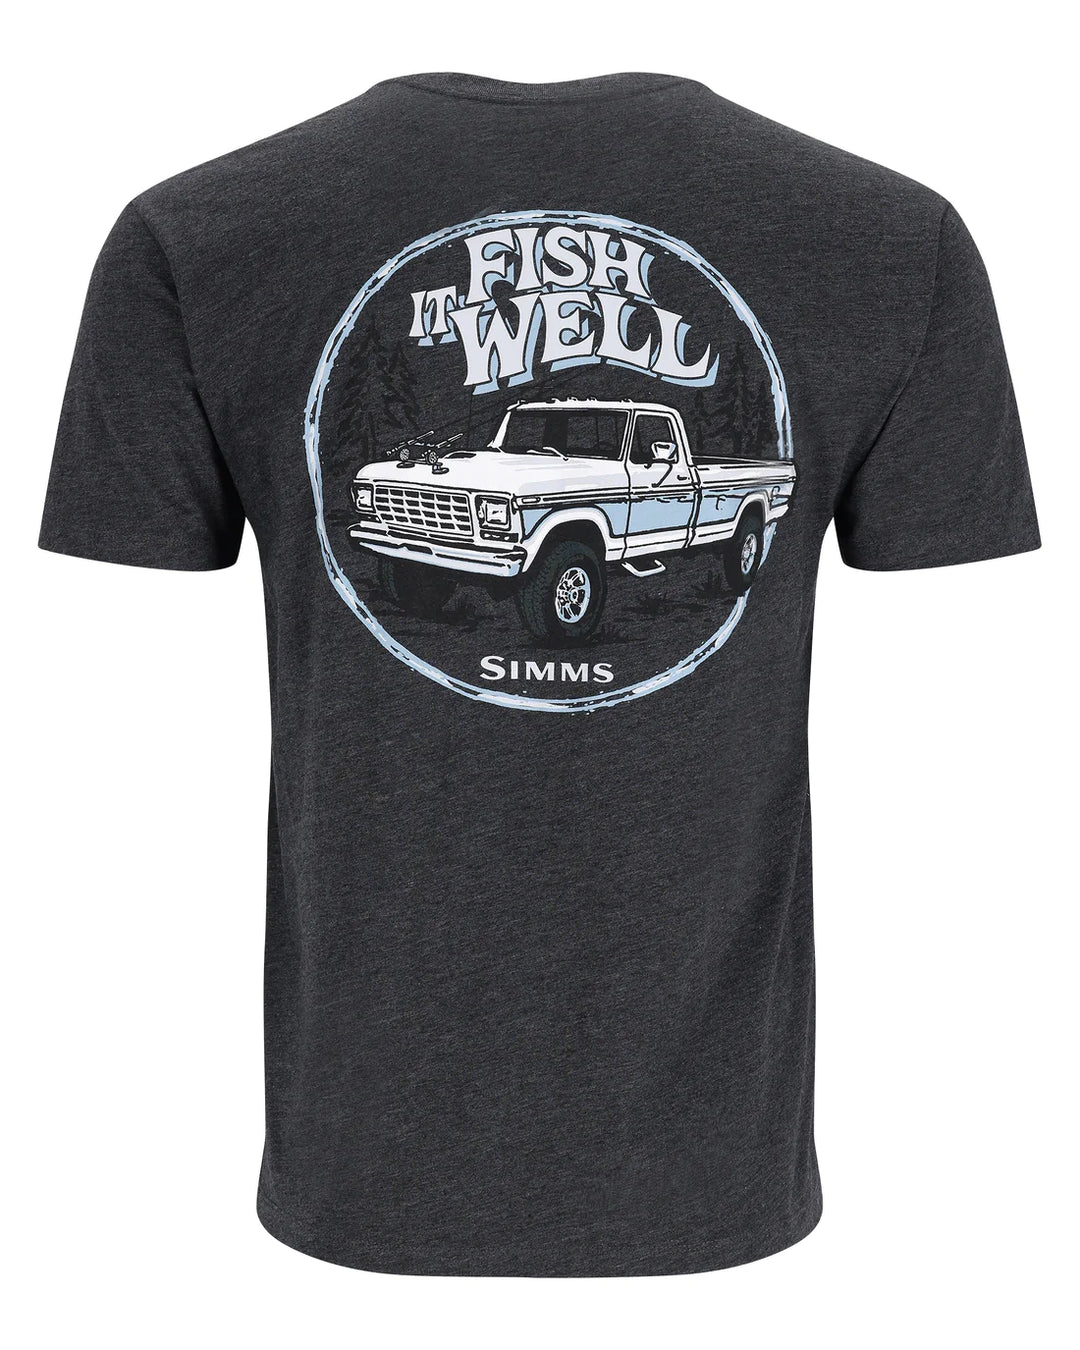 Simms - M's Fish It Well Truck T-Shirt - Charcoal Heather